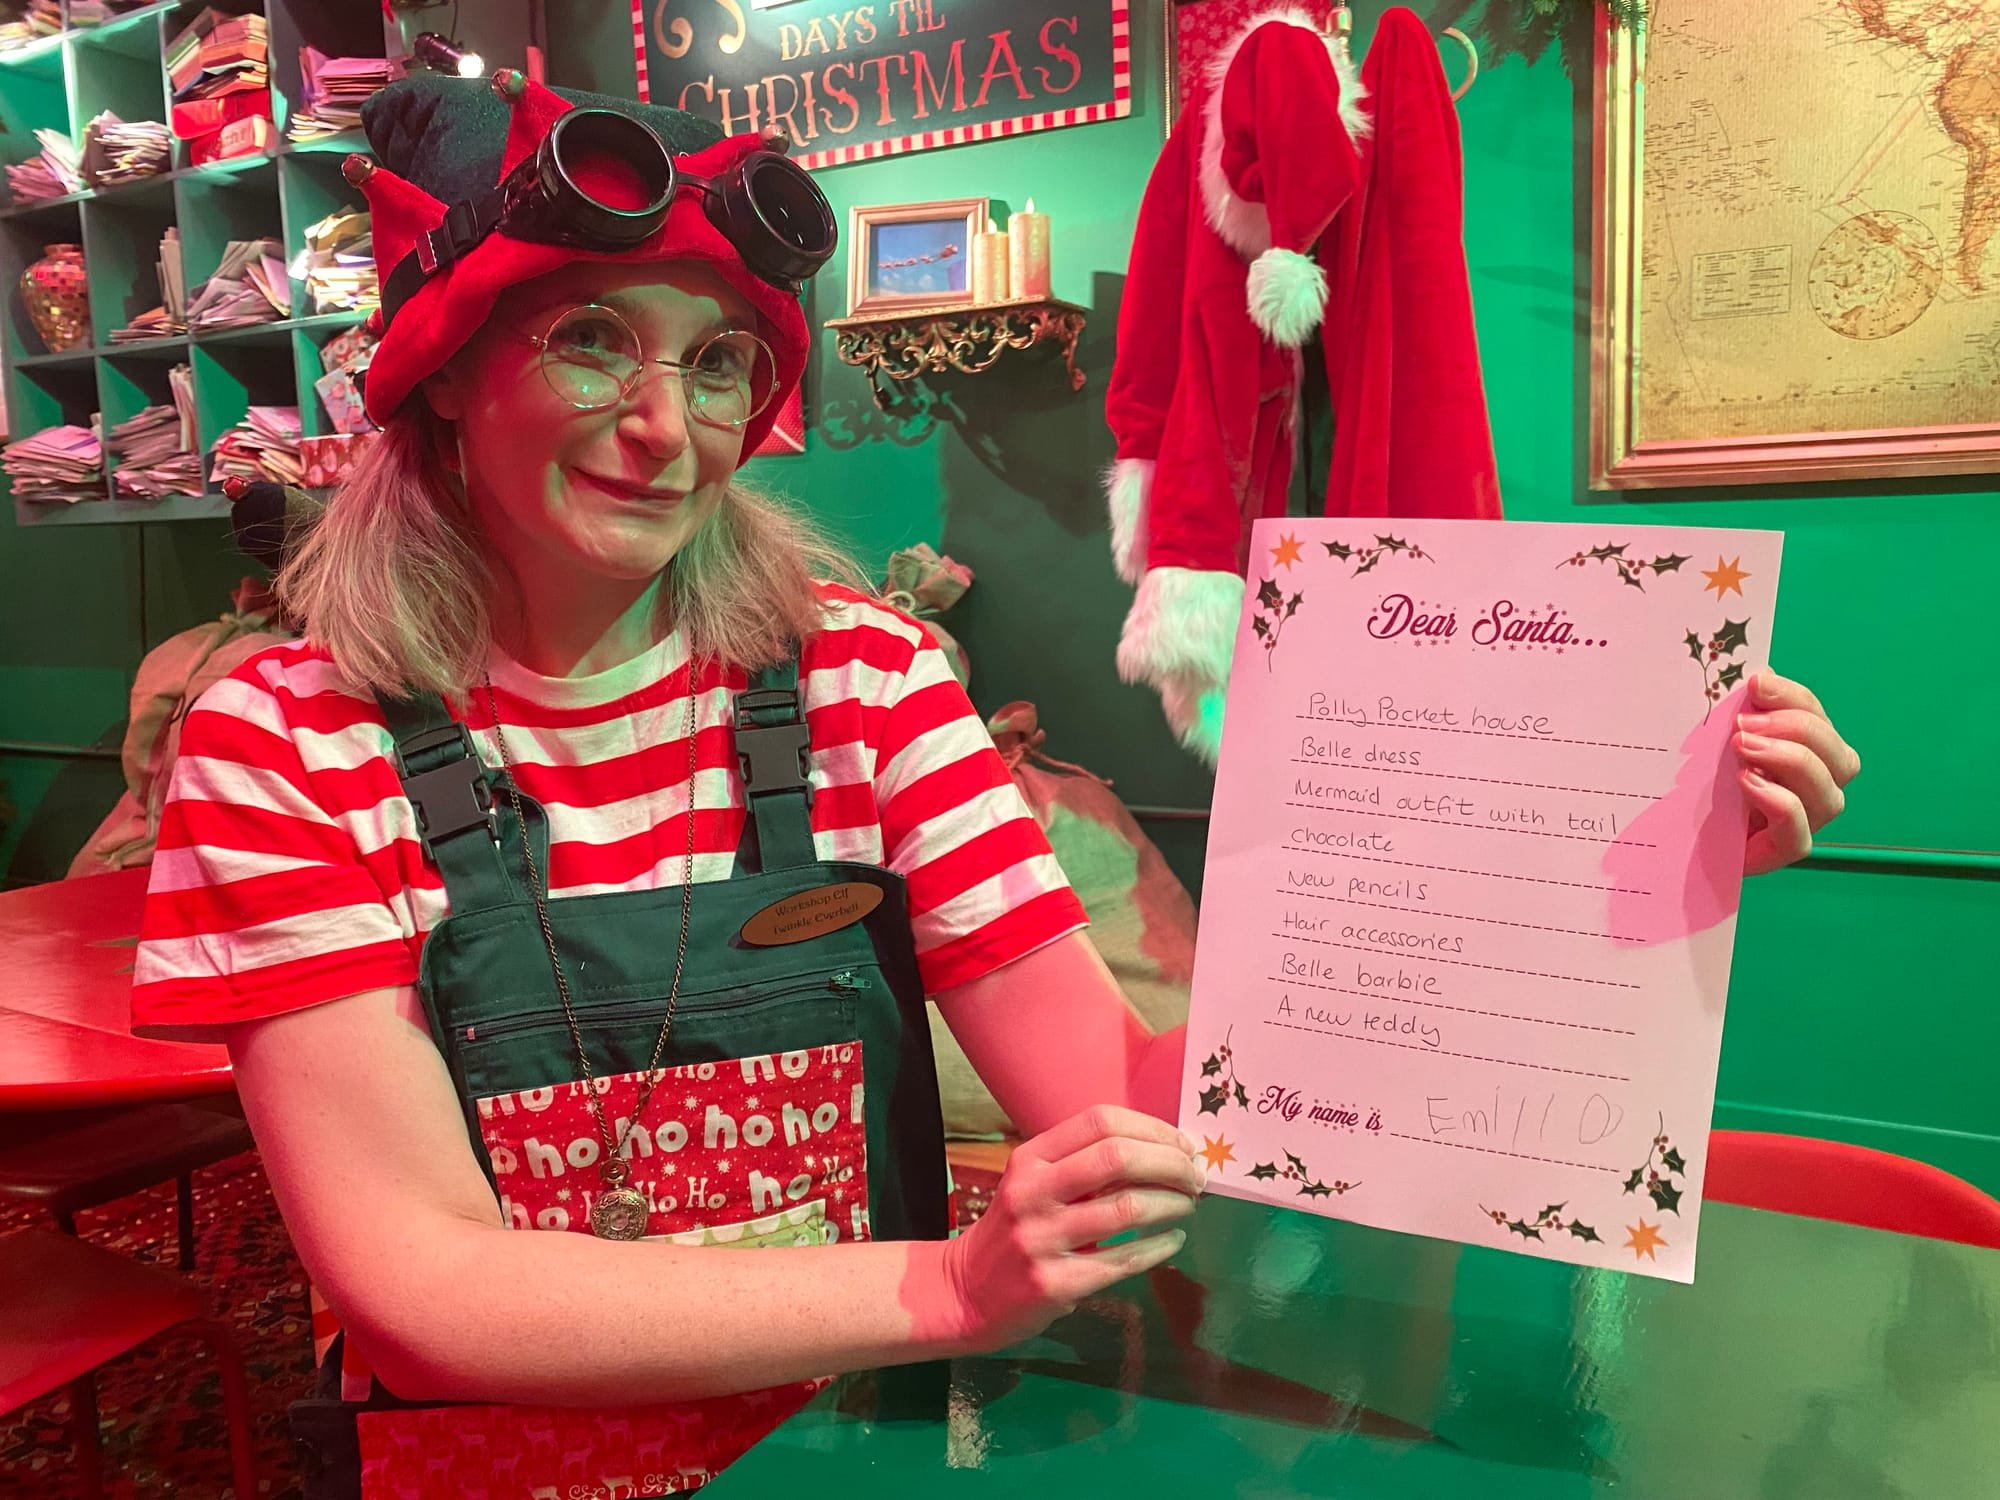 Santa’s Study opens doors daily to ensure ‘wish lists’ make it to the North Pole